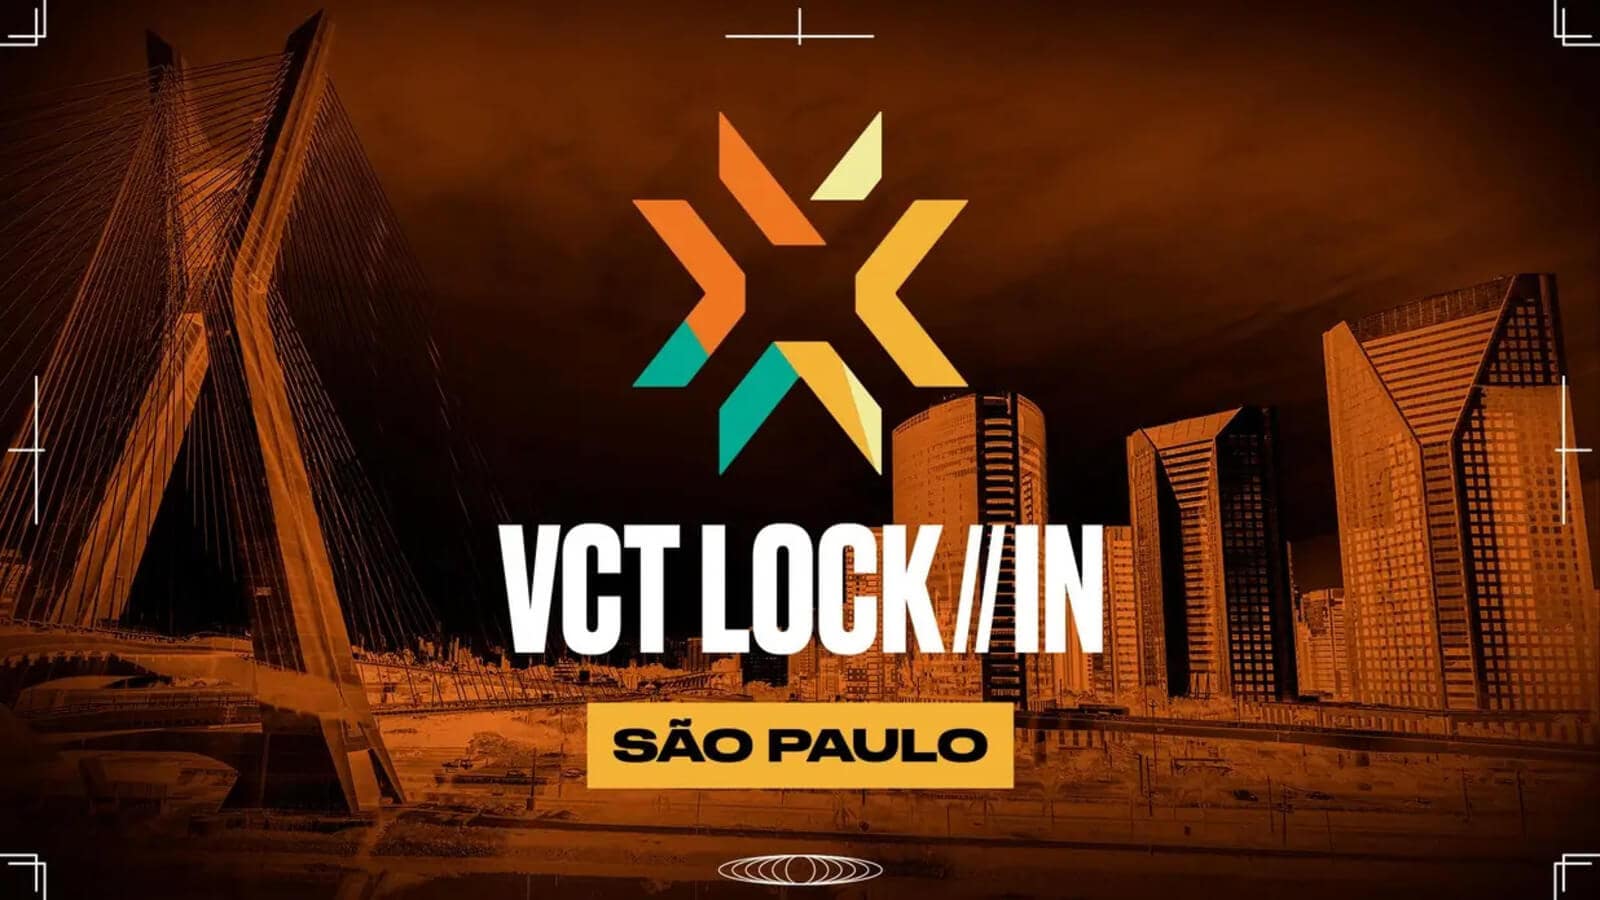 Valorant VCT LOCK//IN: Results, schedule, and how to watch